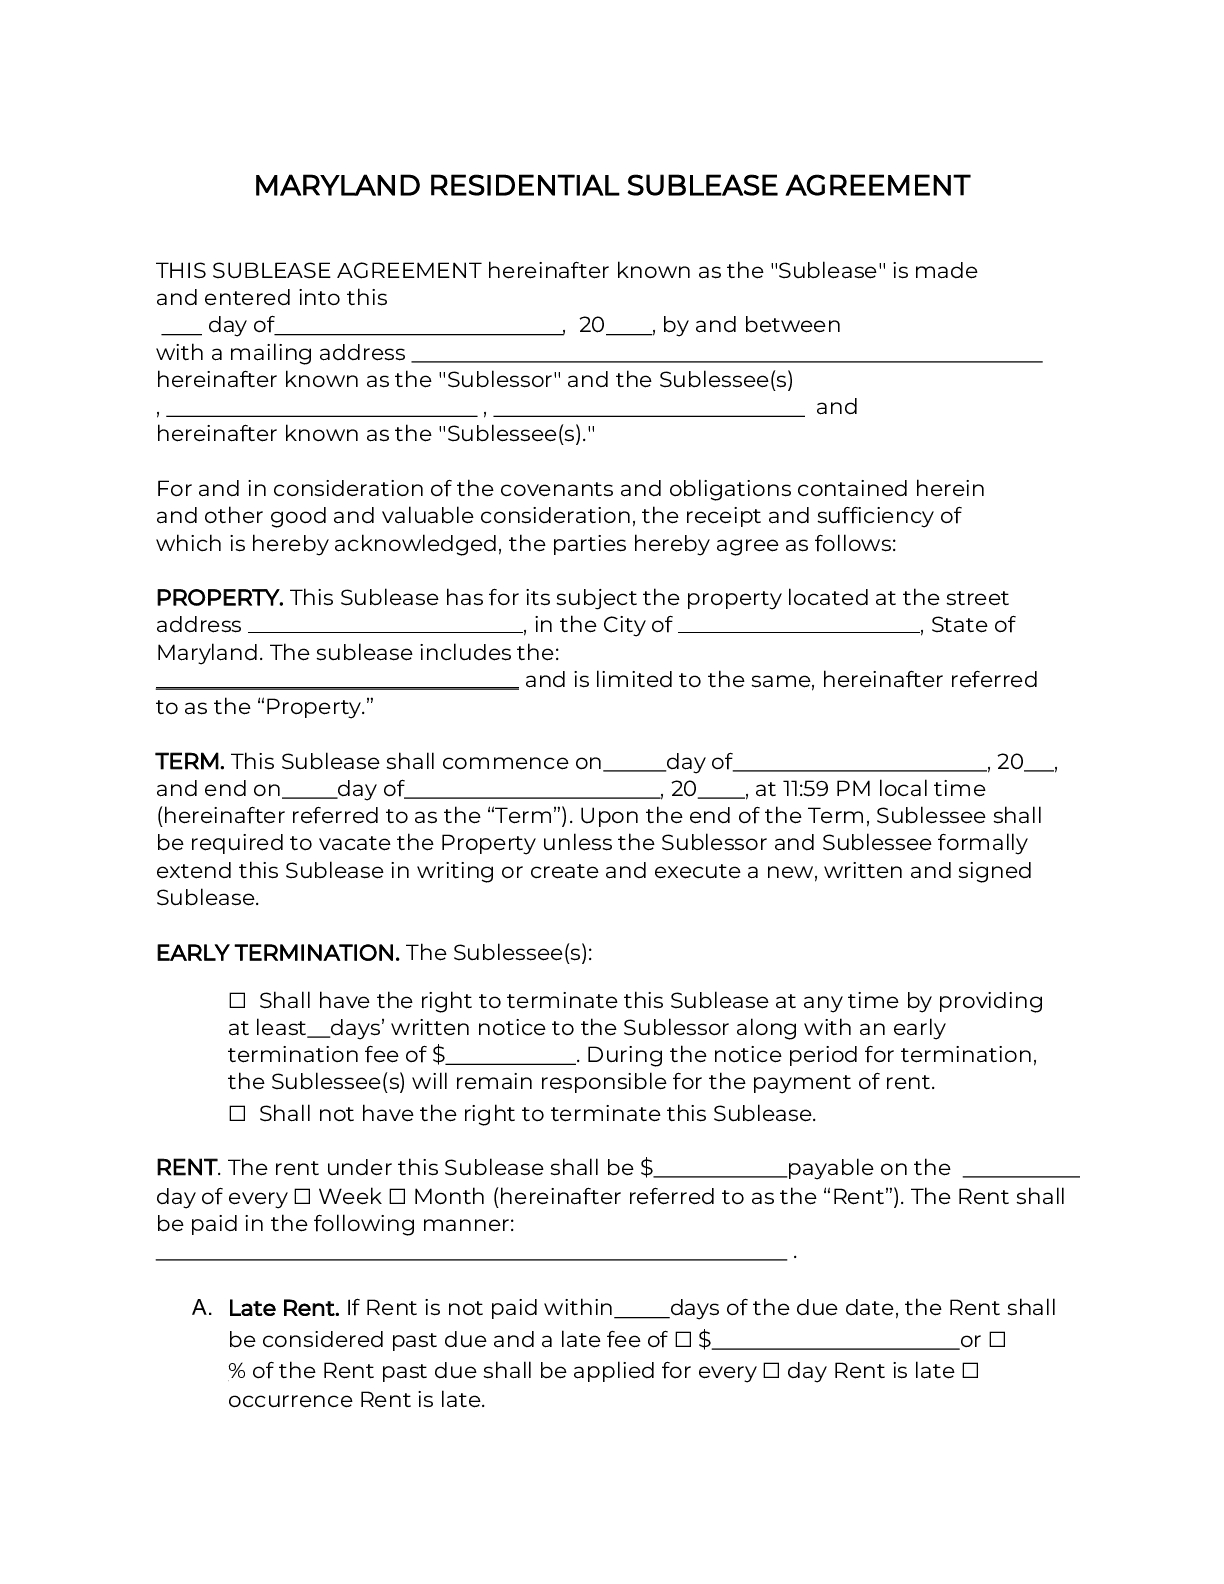 official-maryland-sublease-agreement-form-2021-pdf-doc